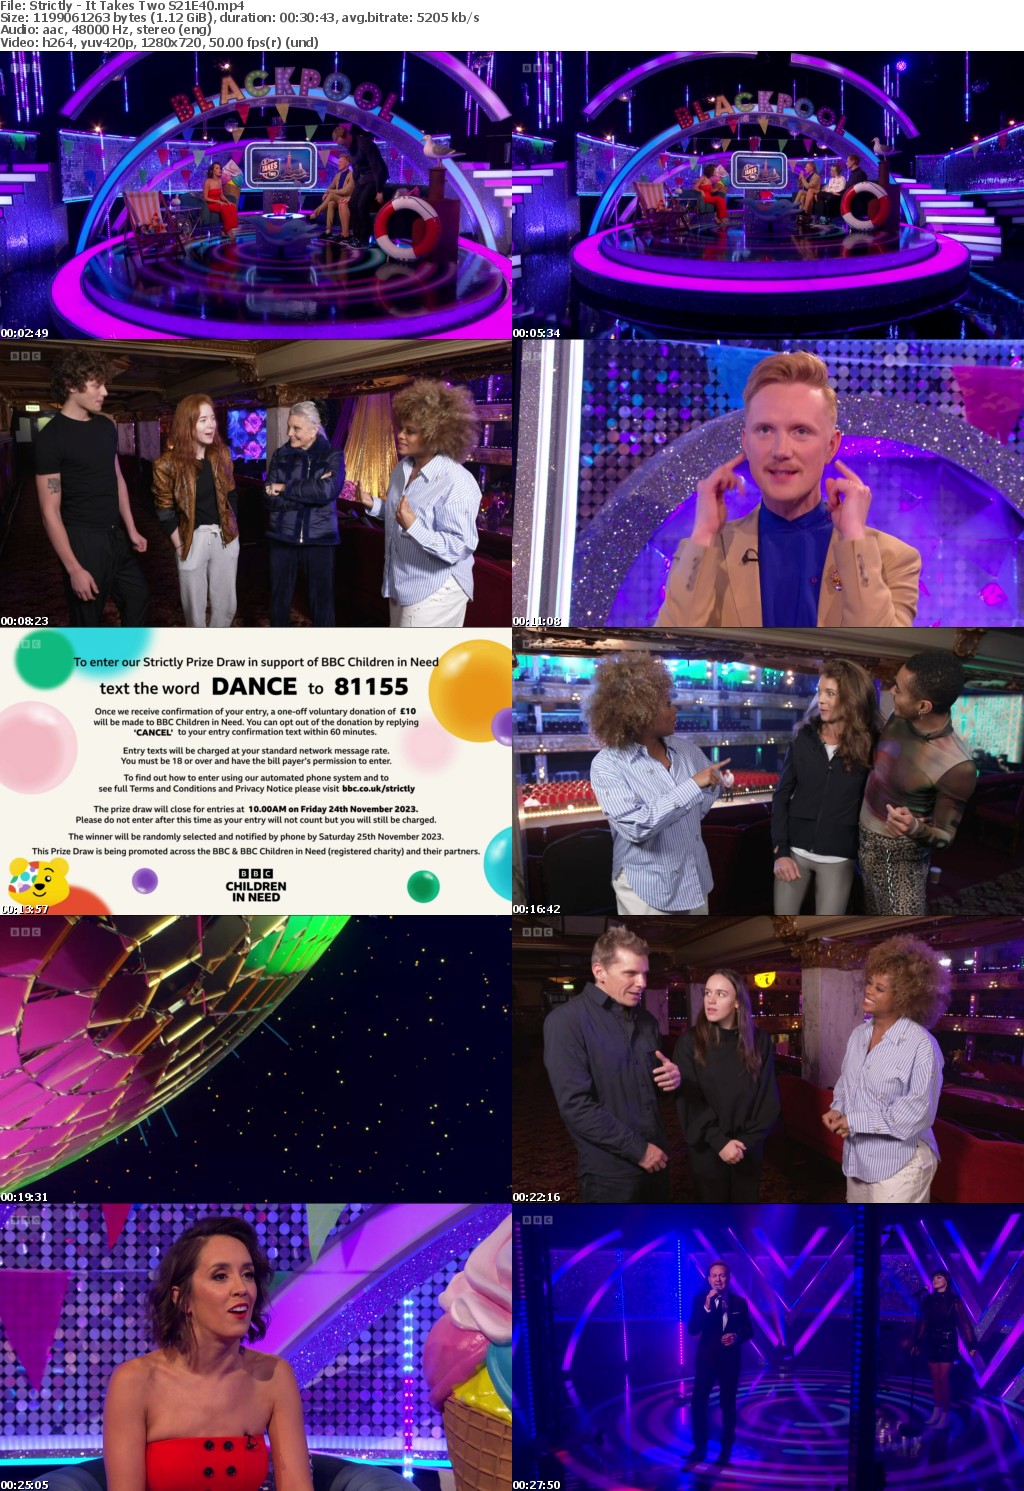 Strictly - It Takes Two S21E40 (1280x720p HD, 50fps, soft Eng subs)